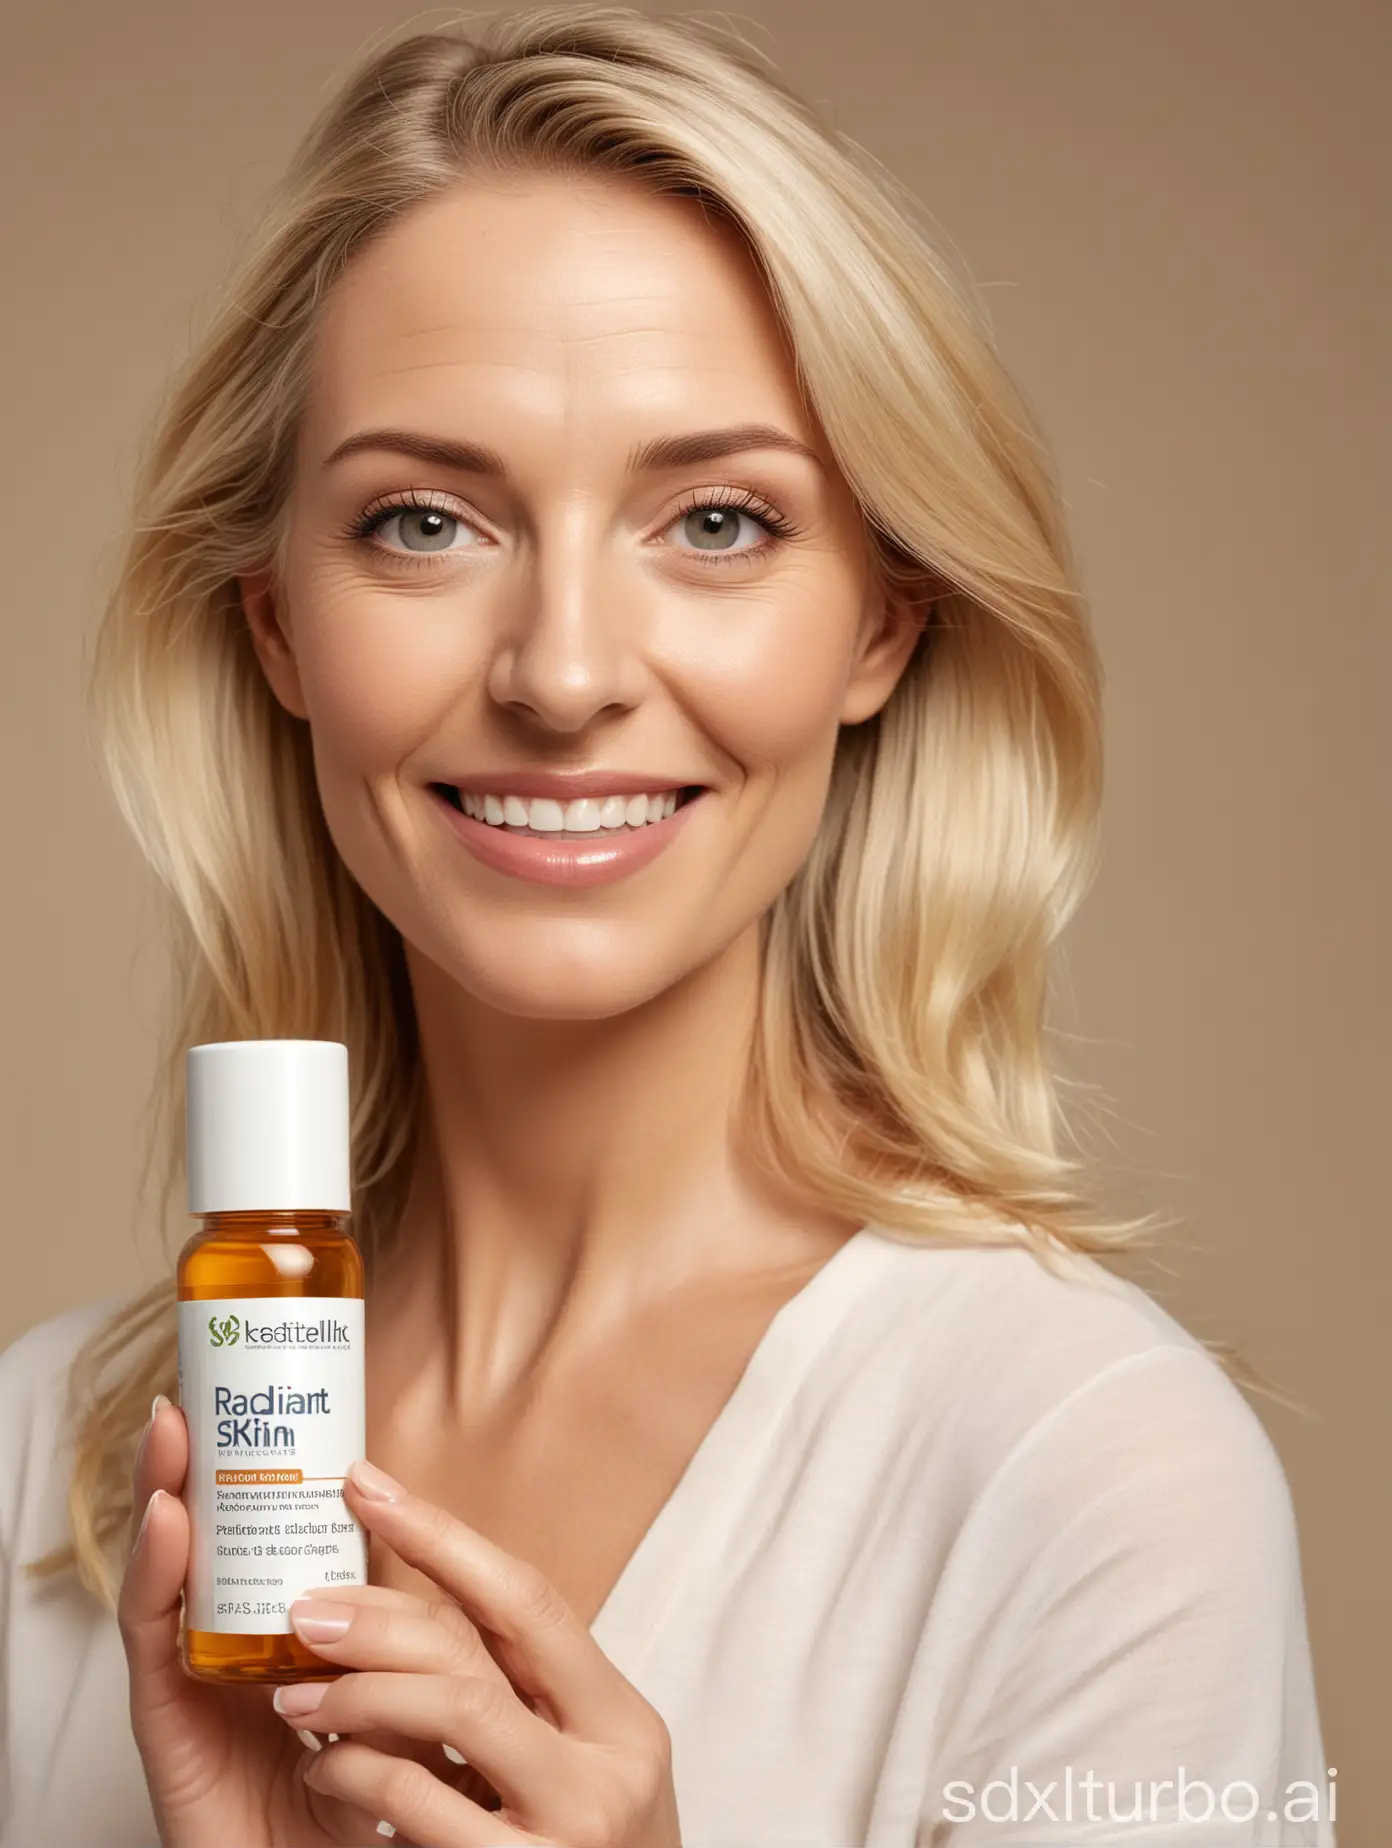 Radiant Skin Natural Beauty Skincare Product Advertisement, 45 years old blonde woman holding a 4 inches tall pills bottle